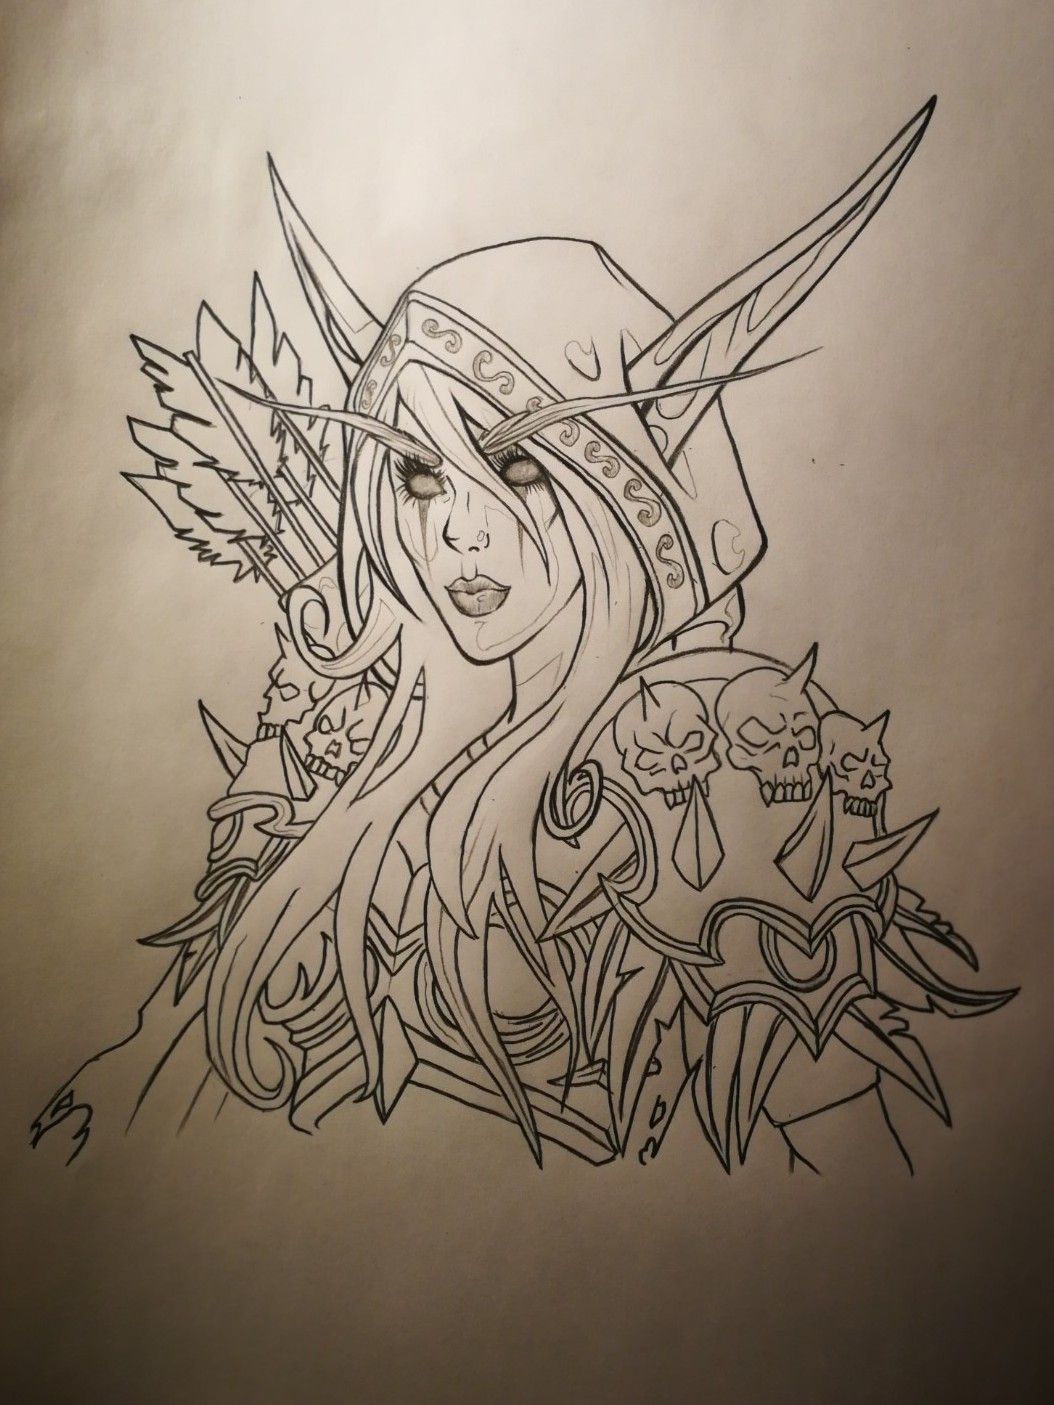 How To Draw Sylvanas Windrunner From World Of Warcraft Step by Step  Drawing Guide by finalprodigy  DragoArt